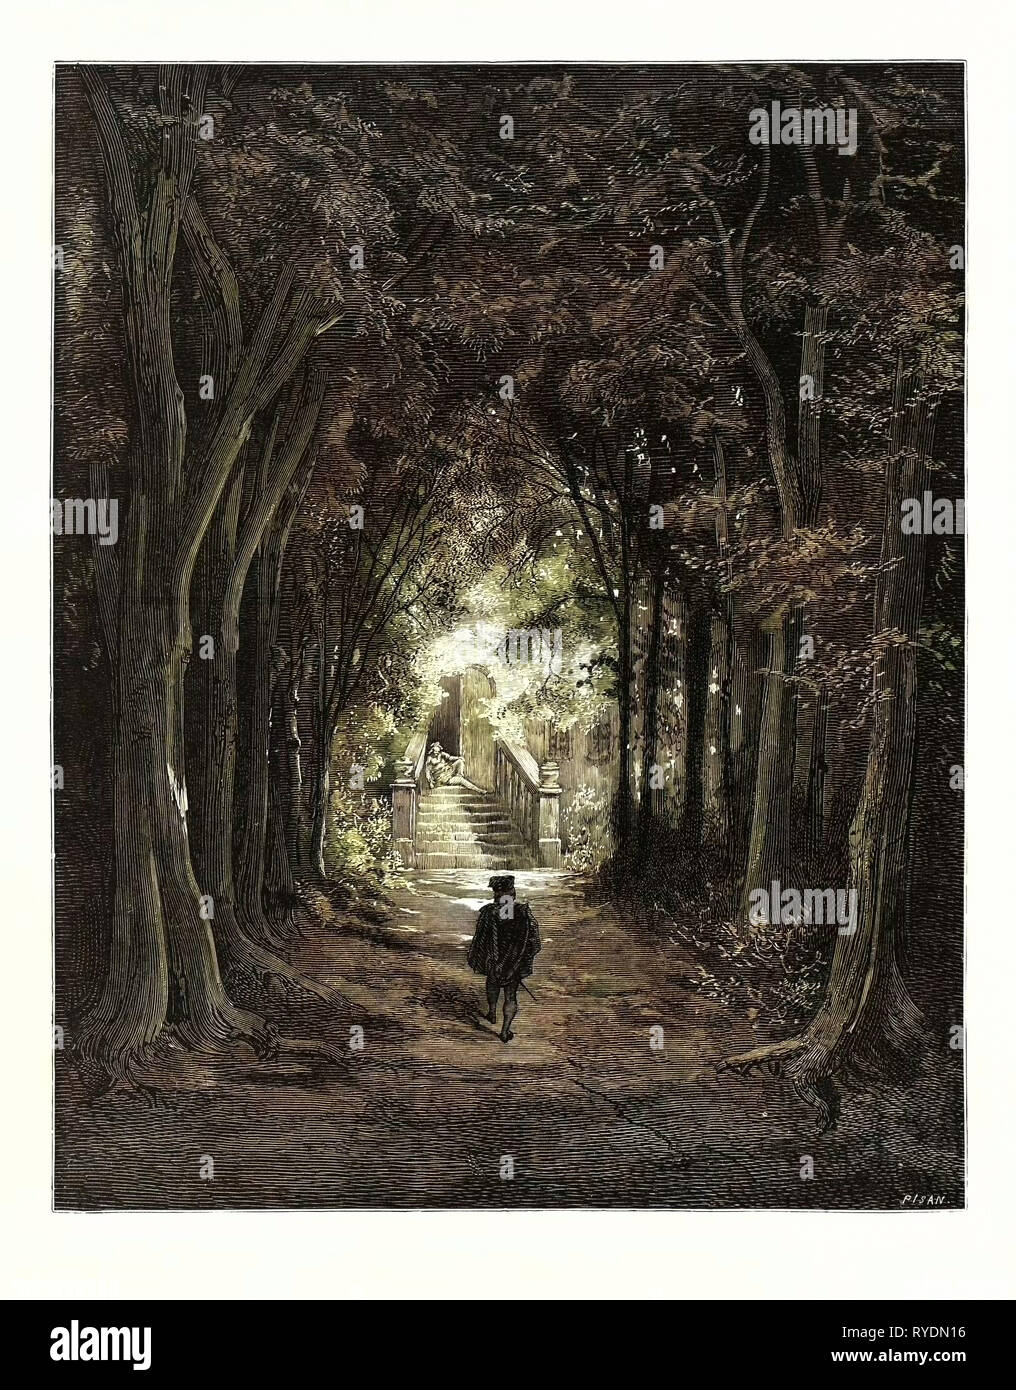 The Approach to the Enchanted Palace, by Gustave Doré, 1832 - 1883, French. Engraving for the Fairy Realm. 1870, Art, Artist, Romanticism, Colour, Color Engraving Stock Photo